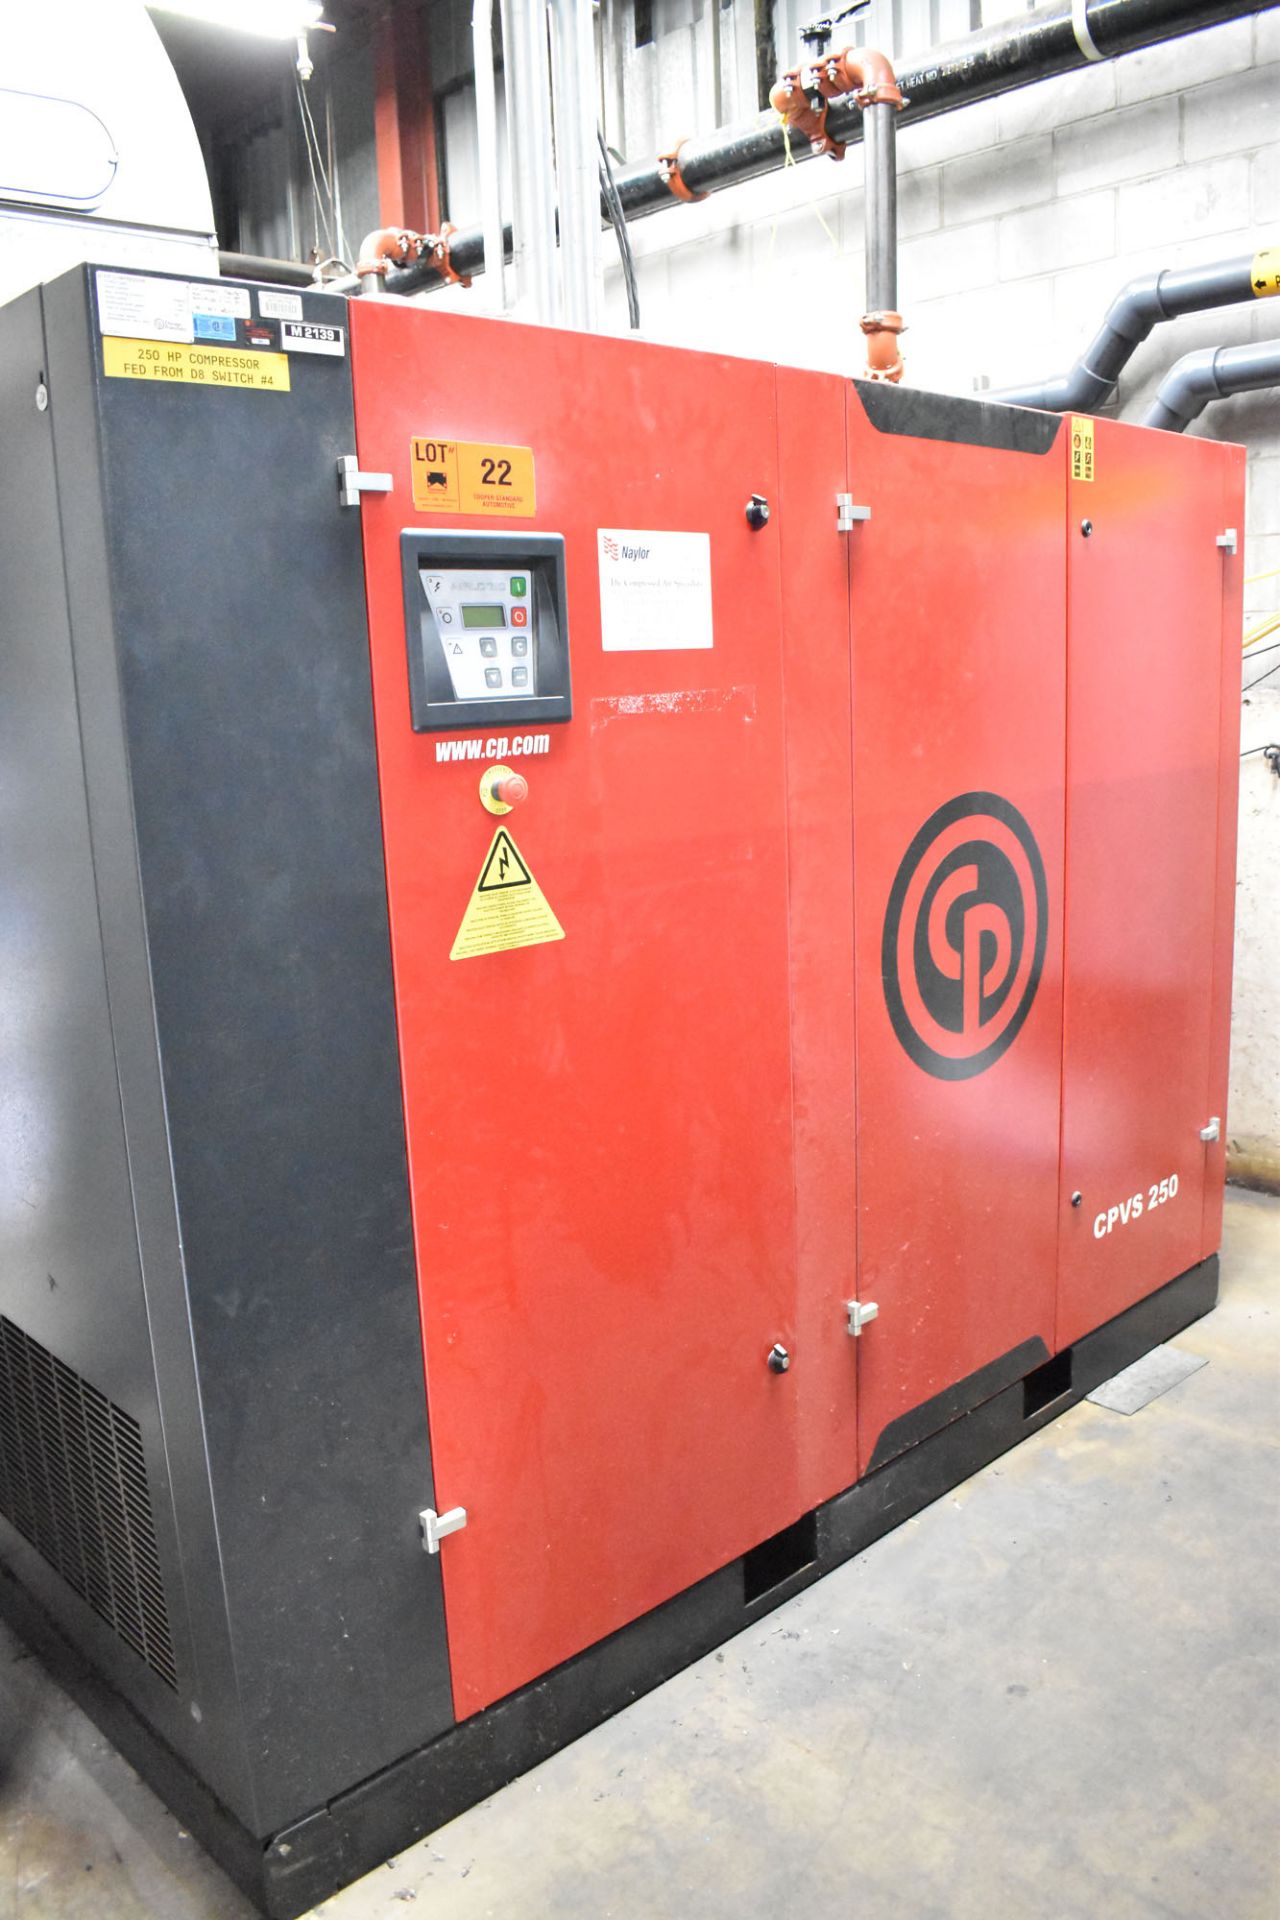 CHICAGO PNEUMATIC (2014) CPVS250 250 HP ROTARY SCREW AIR COMPRESSOR WITH APPROX. 36,545HOURS (